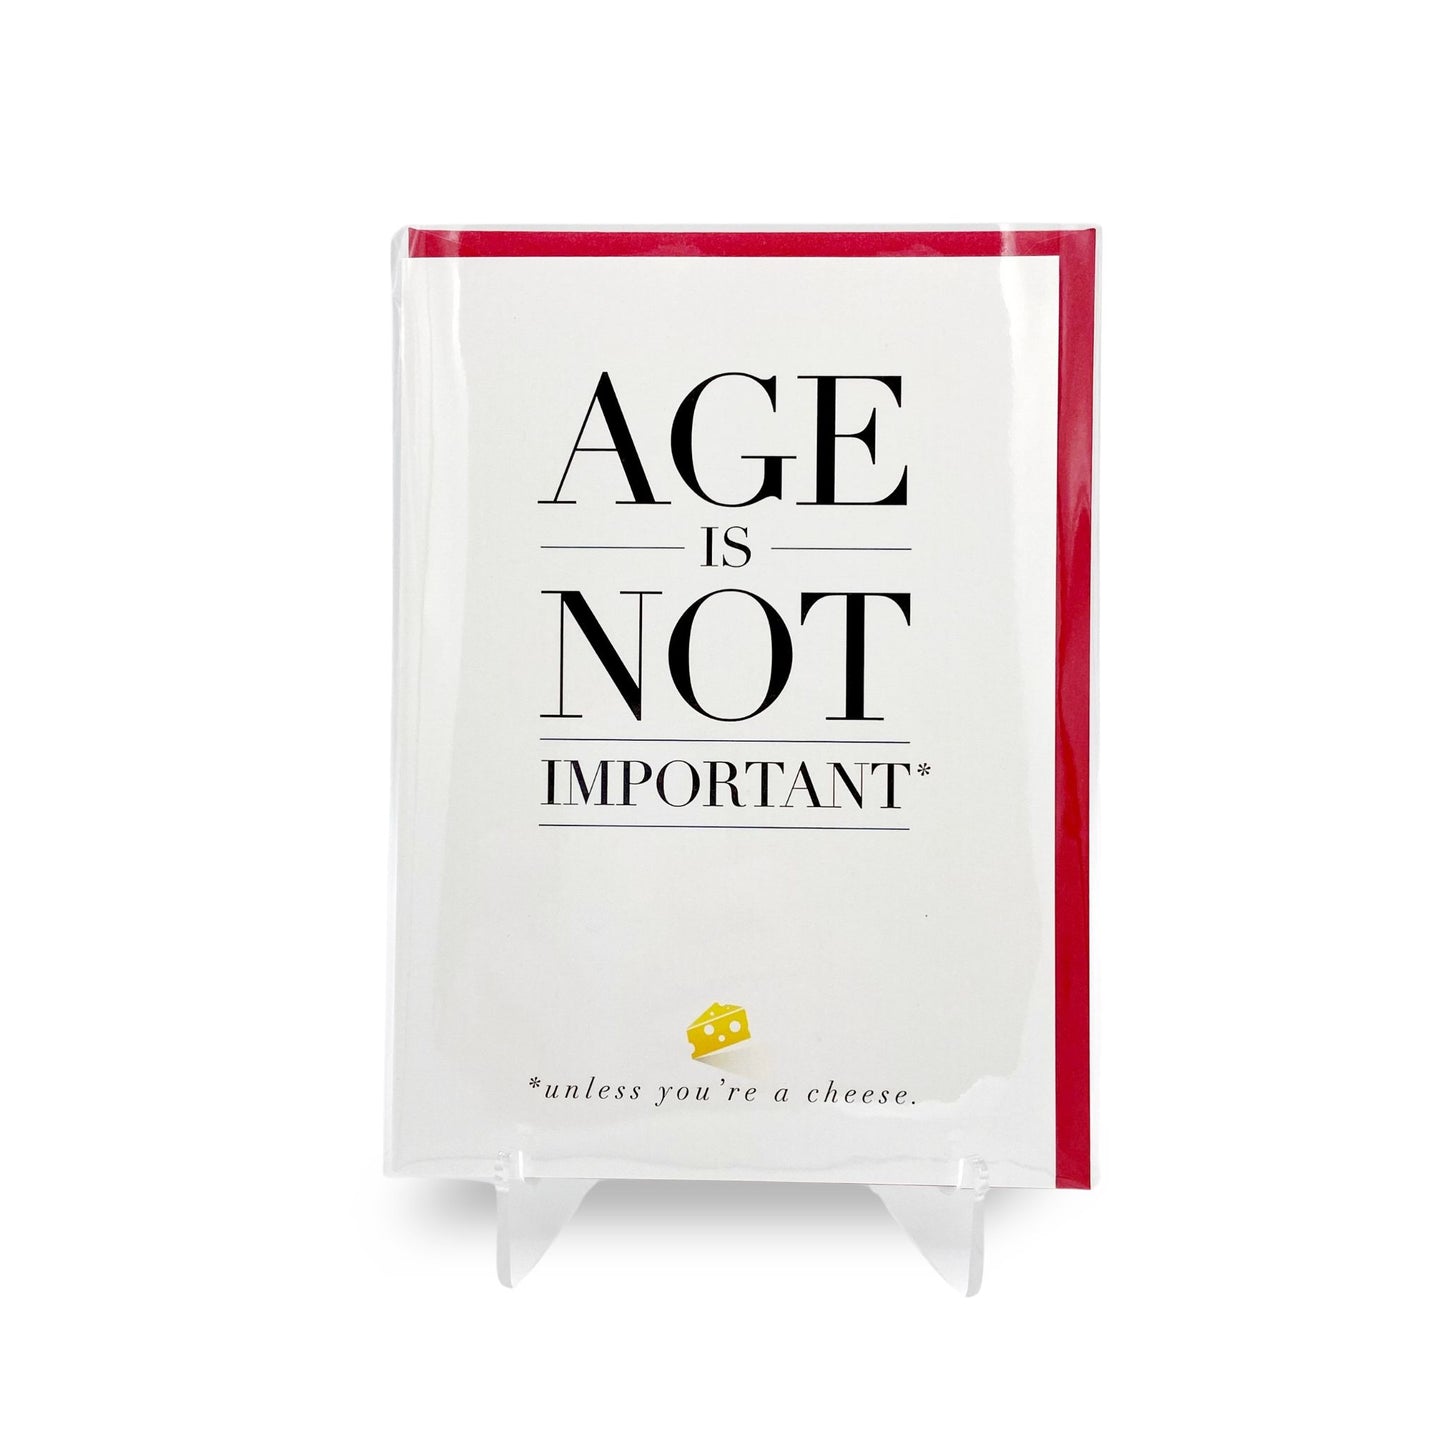 Age is Not important card